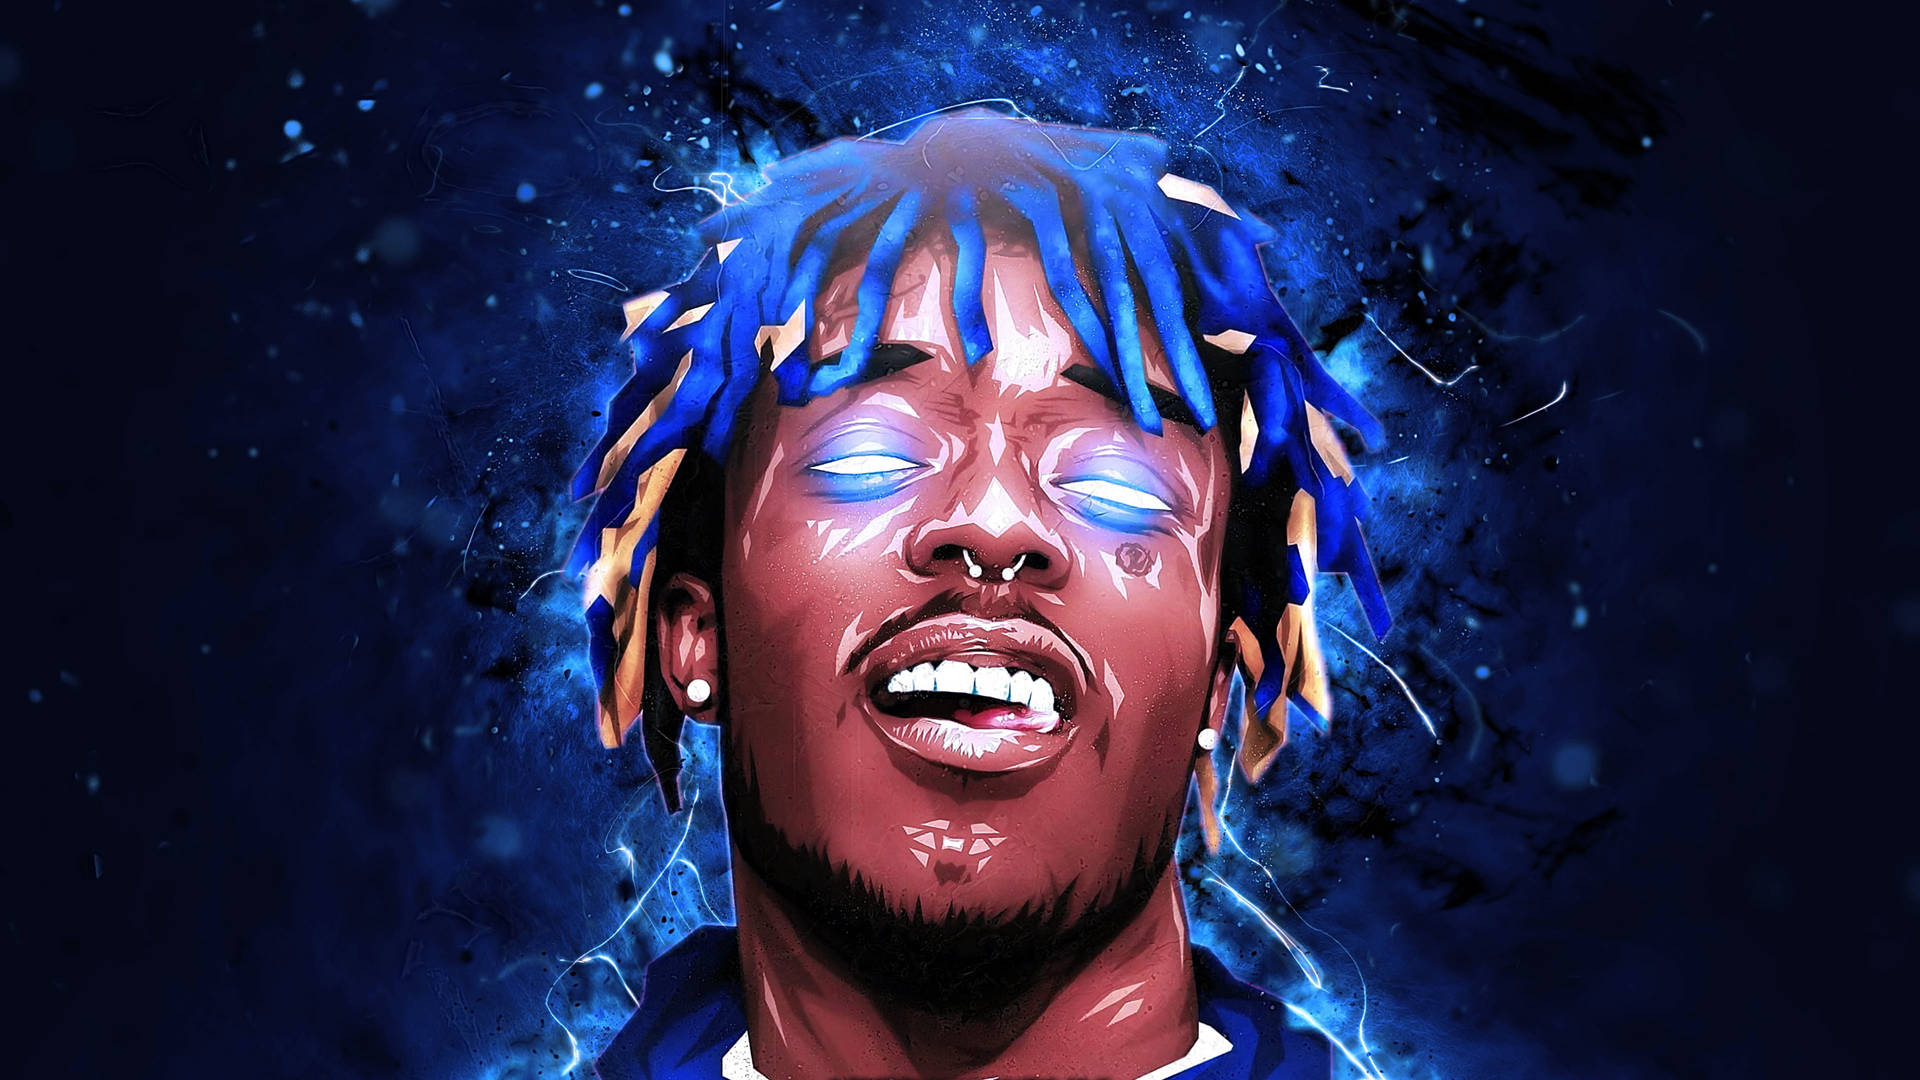 Xxxtentacion In Blue - A Vision In Melancholy Background